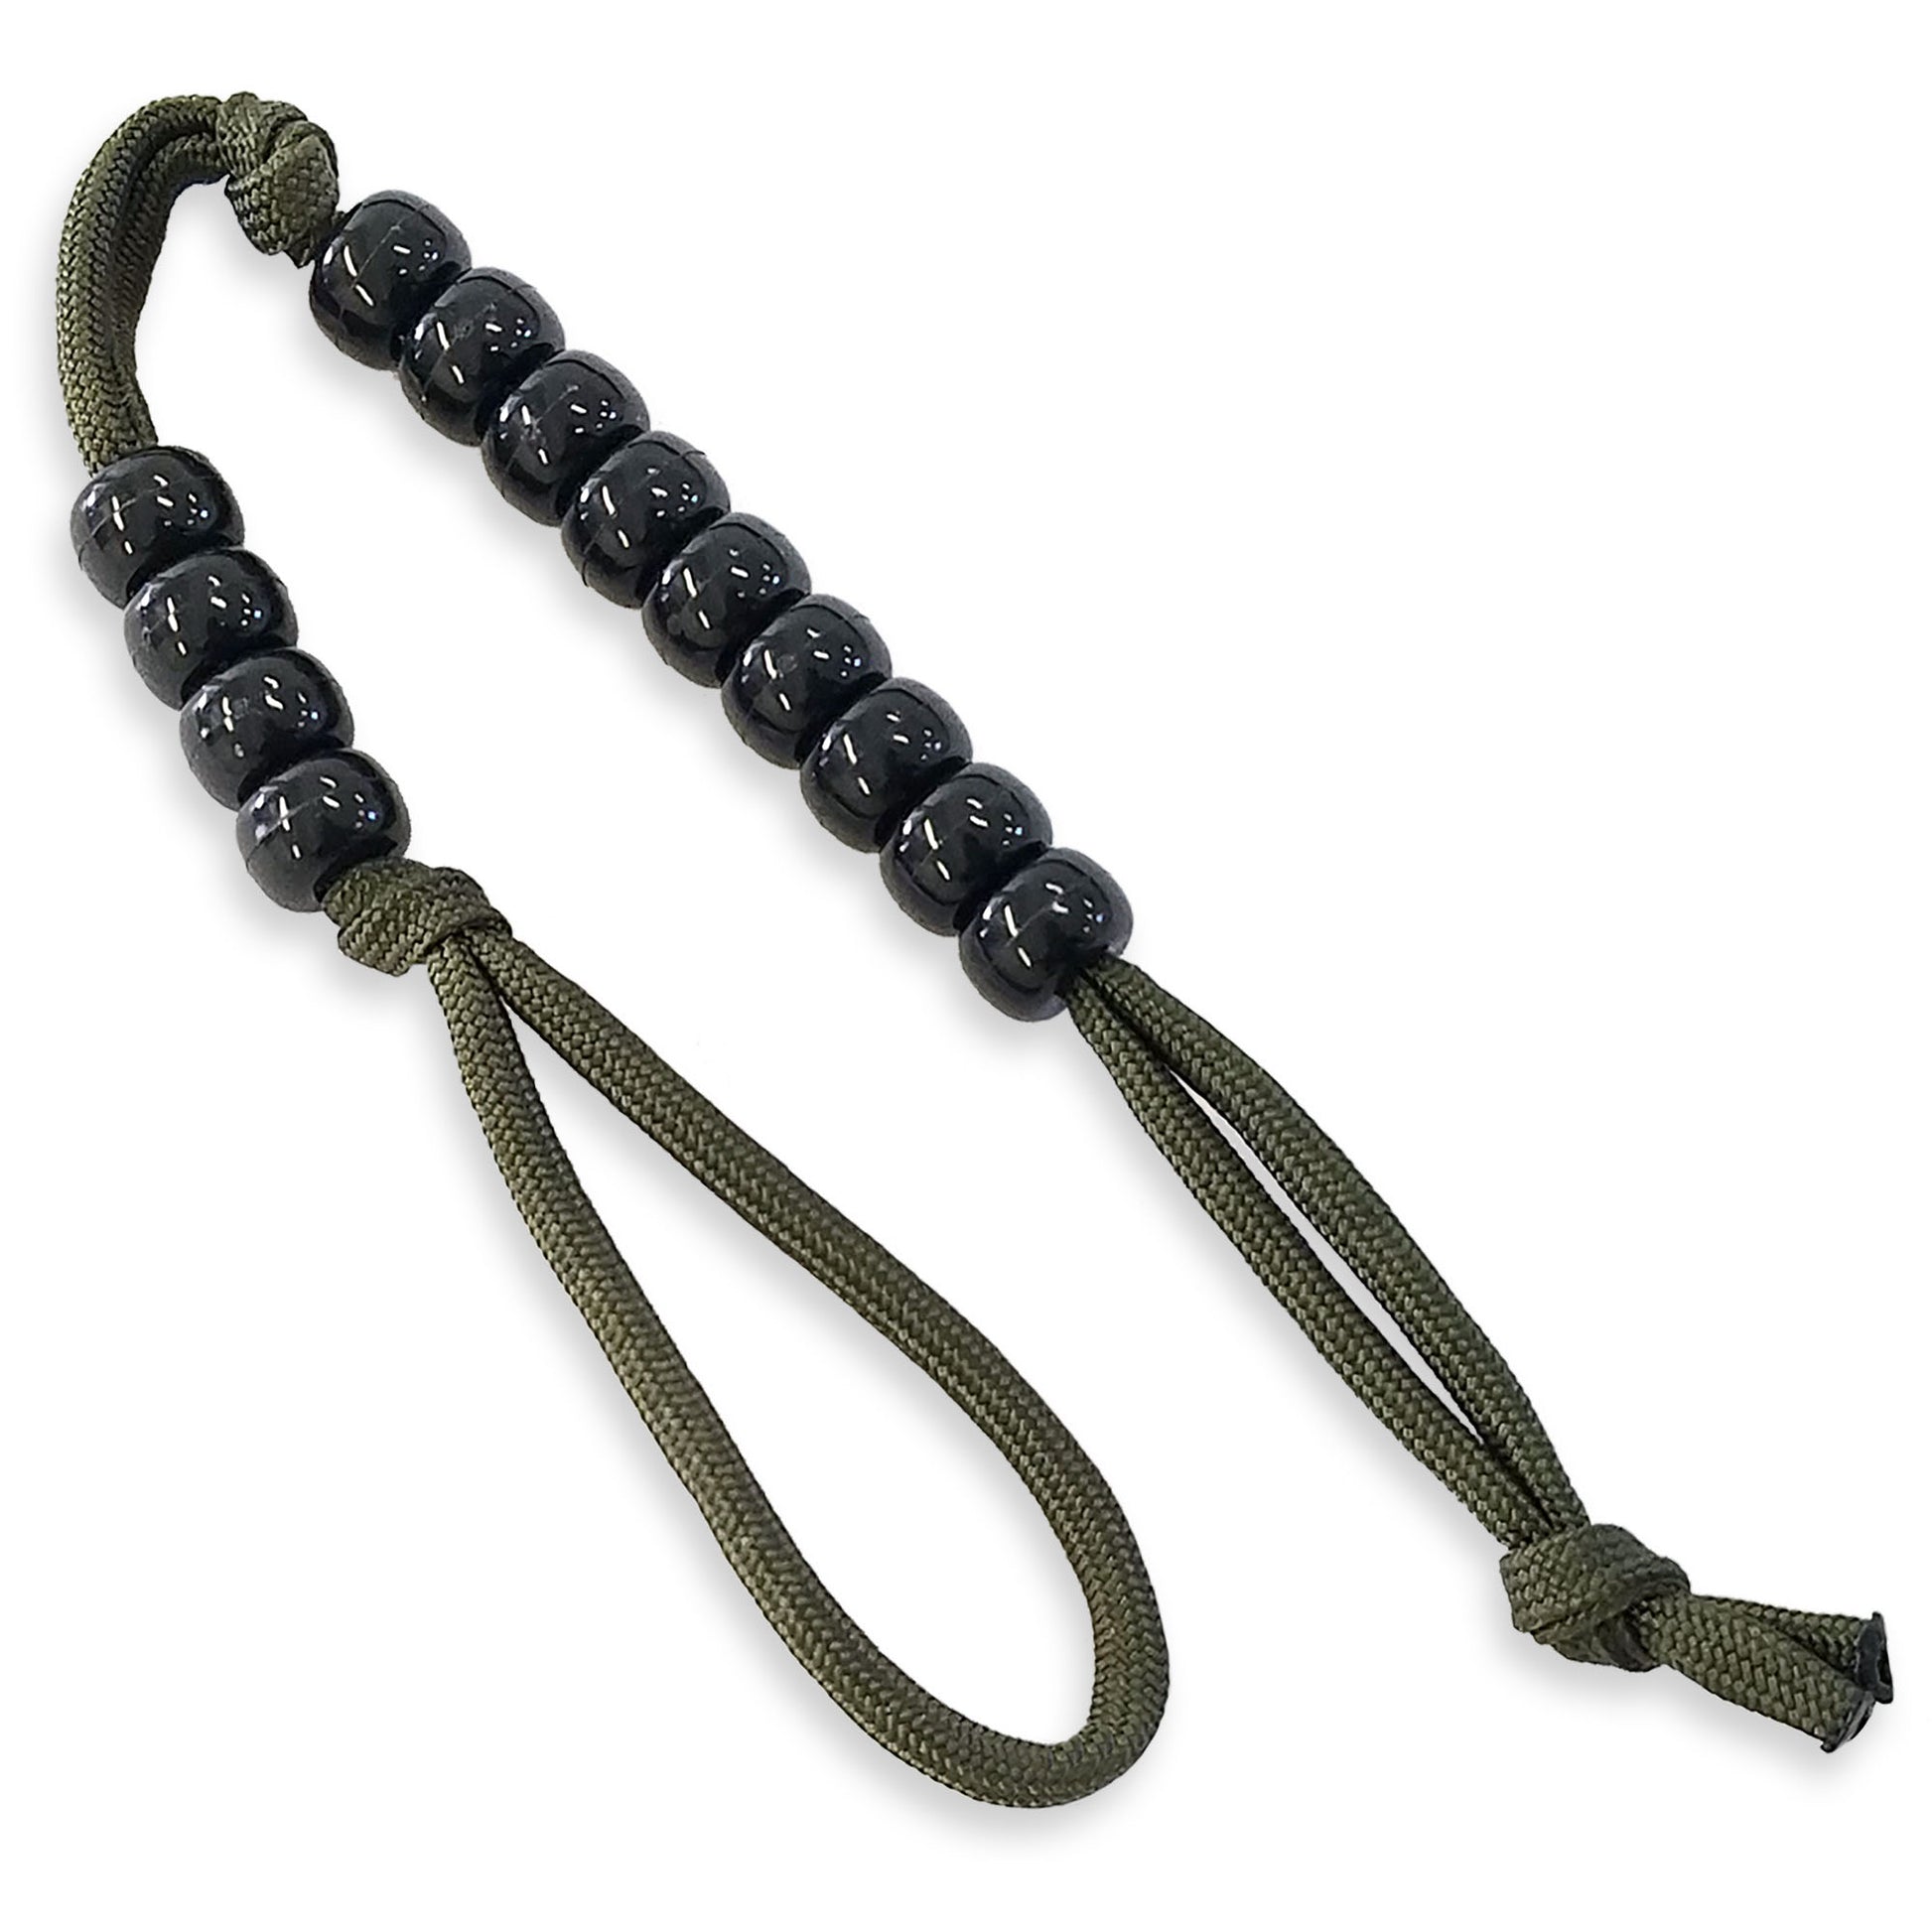 Ranger Paracord Pacecounter Beads - Set of Three (3) - Free